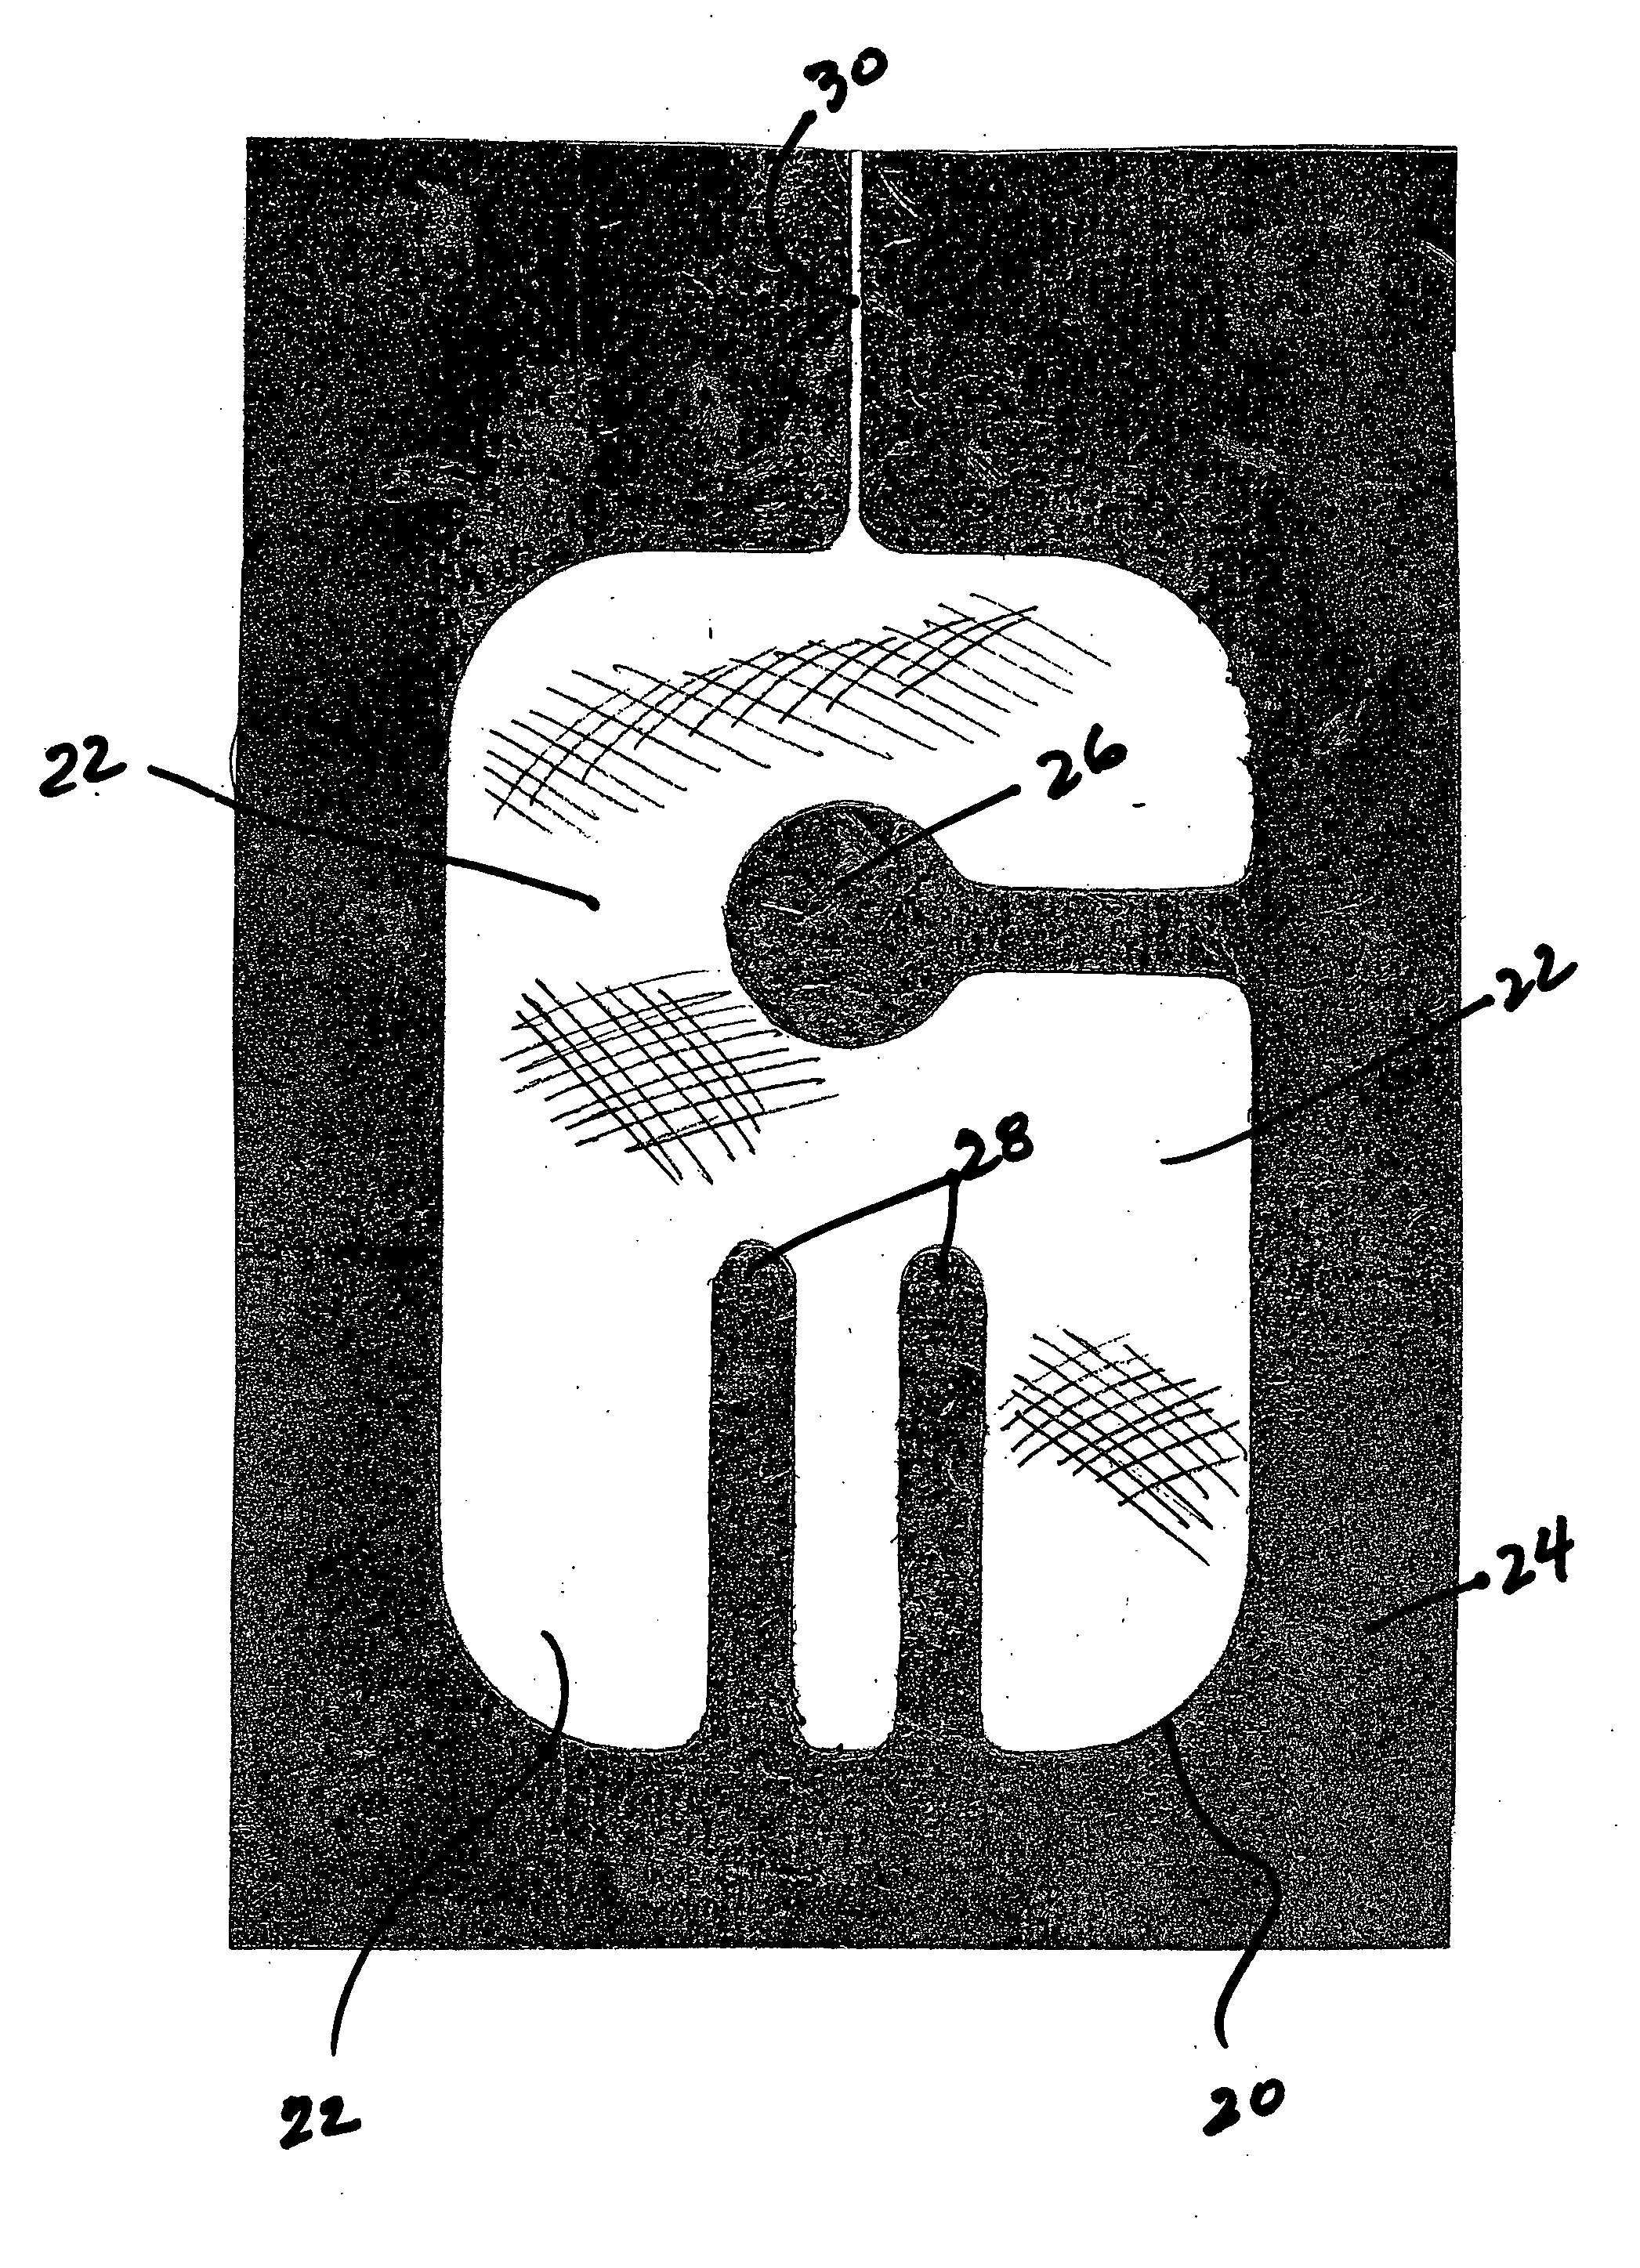 Method for manufacturing inflatable footwear or bladders for use in inflatable articles